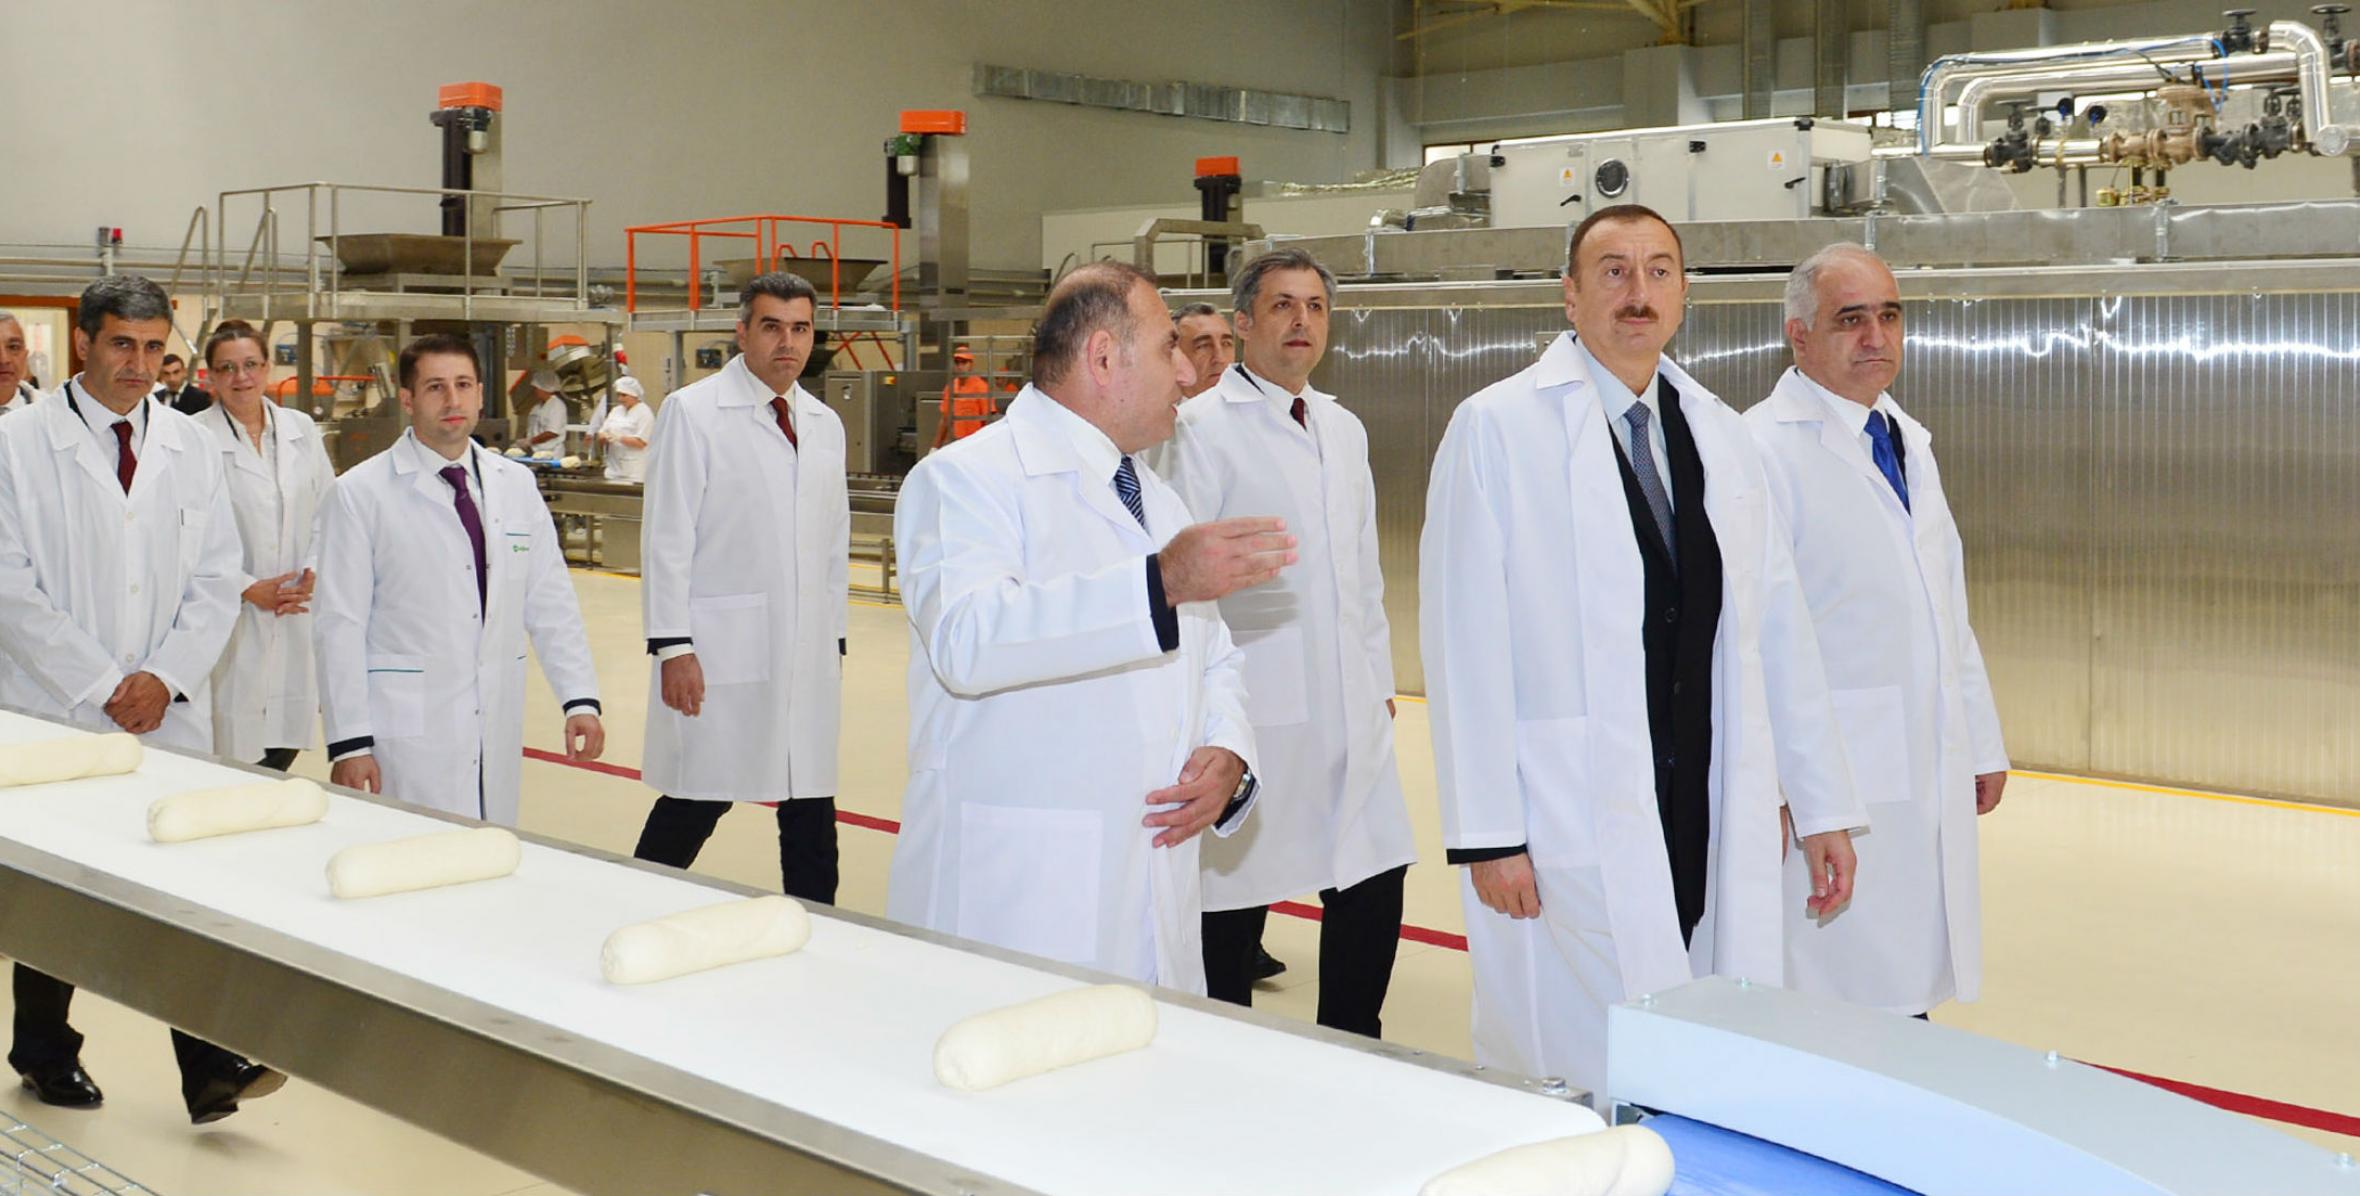 Ilham Aliyev attended the opening of the "Saglam gida" agro-industrial complex